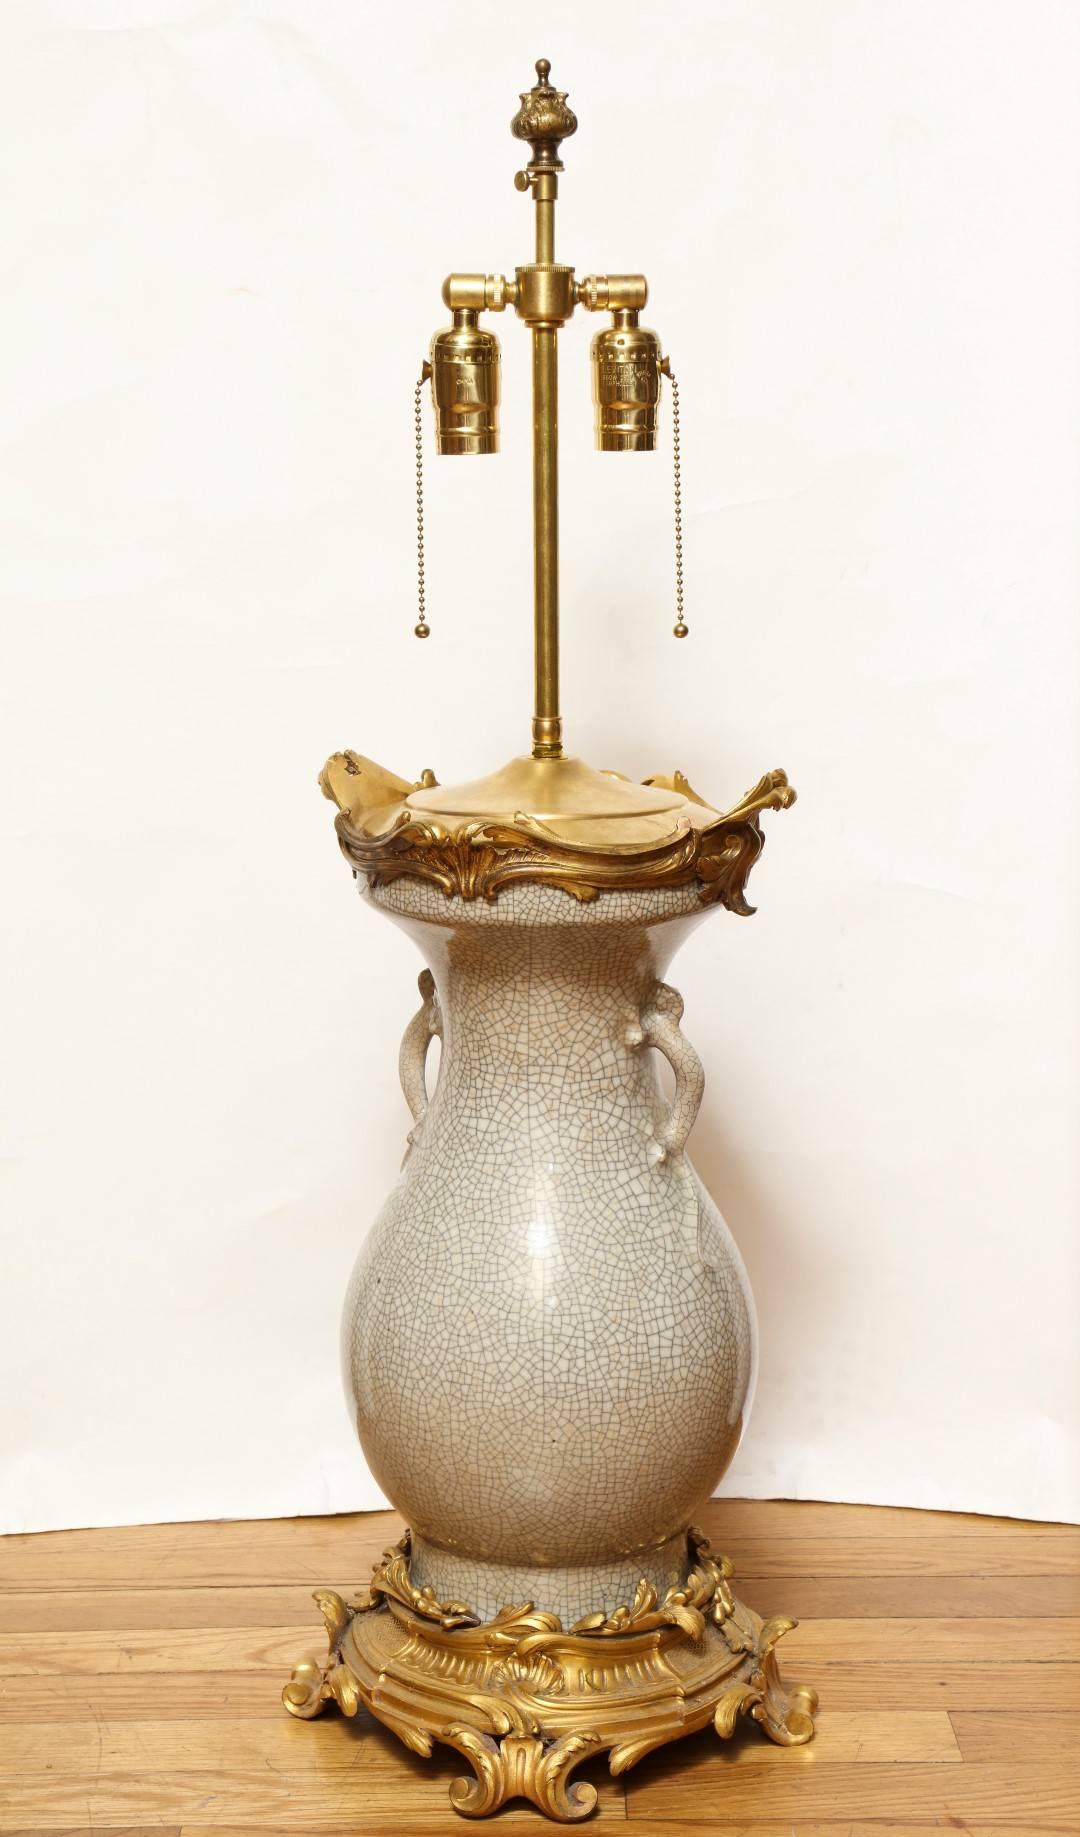 A Louis XV style ormolu-mounted crackle glaze porcelain vase, the baluster shaped body with pierced ring handles, the neck mounted with pierced acanthus, on scrolling rocaille plinth.
 
31.5